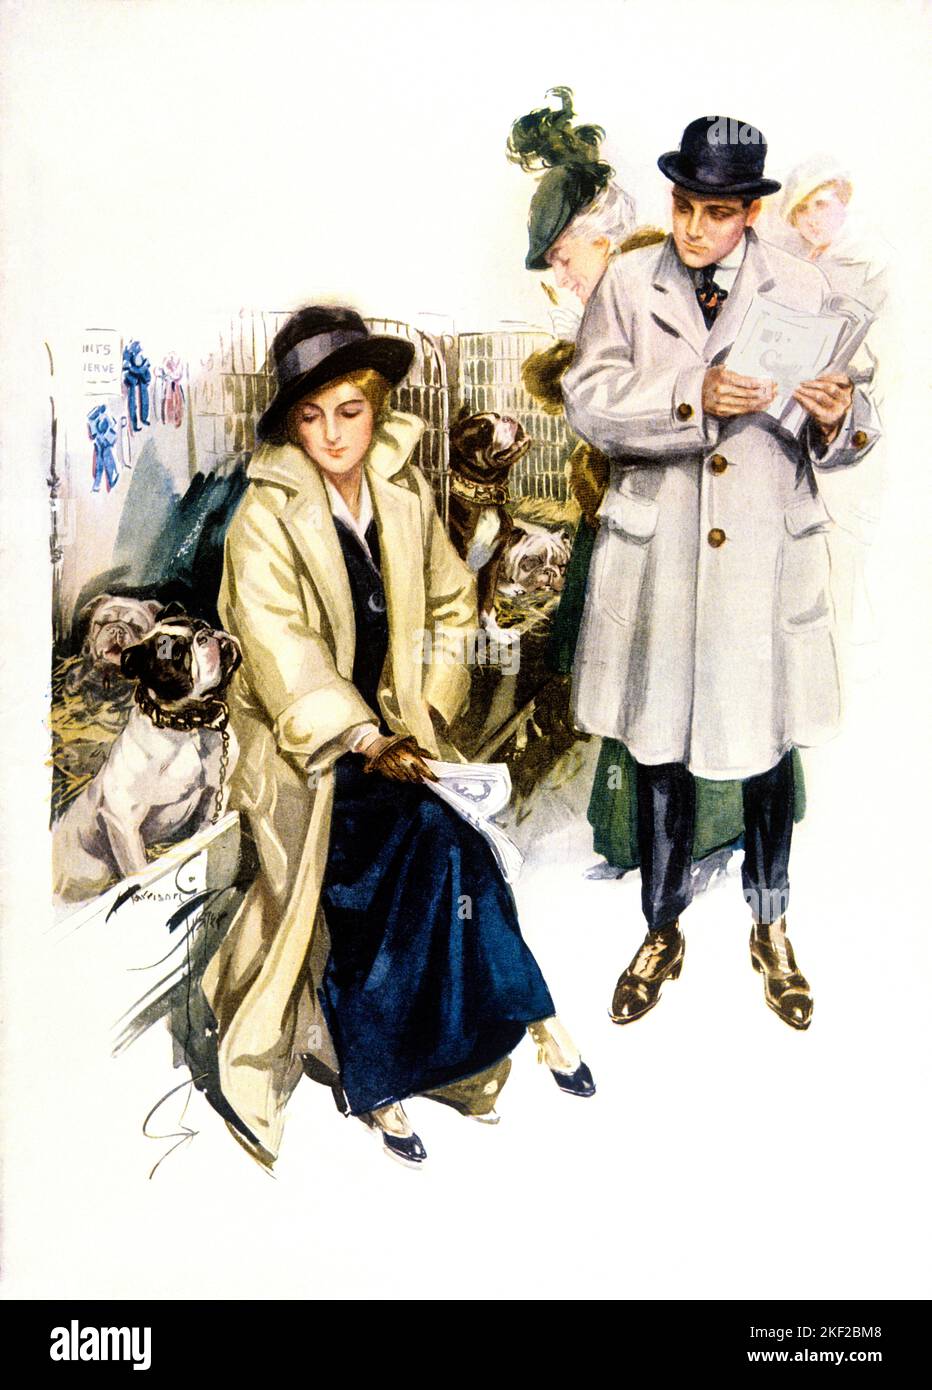 1910s FASHIONABLY DRESSED MAN AND WOMAN AT DOG SHOW WOMAN SEATED LOOKING AT FRIENDLY ENGLISH BULLDOG - kh13570 NAW001 HARS LADIES PERSONS MALES ENGLISH SENIOR ADULT SENIOR WOMAN DREAMS MAMMALS HIGH ANGLE STYLES AND BULLDOG CANINES OPPORTUNITY UPSCALE POOCH CONNECTION BULLDOGS CONCEPTUAL FASHIONABLY AFFLUENT APPROACH FRIENDLY STYLISH CANINE FASHIONS MAMMAL MID-ADULT MID-ADULT WOMAN WELL-TO-DO YOUNG ADULT WOMAN OLD FASHIONED Stock Photo